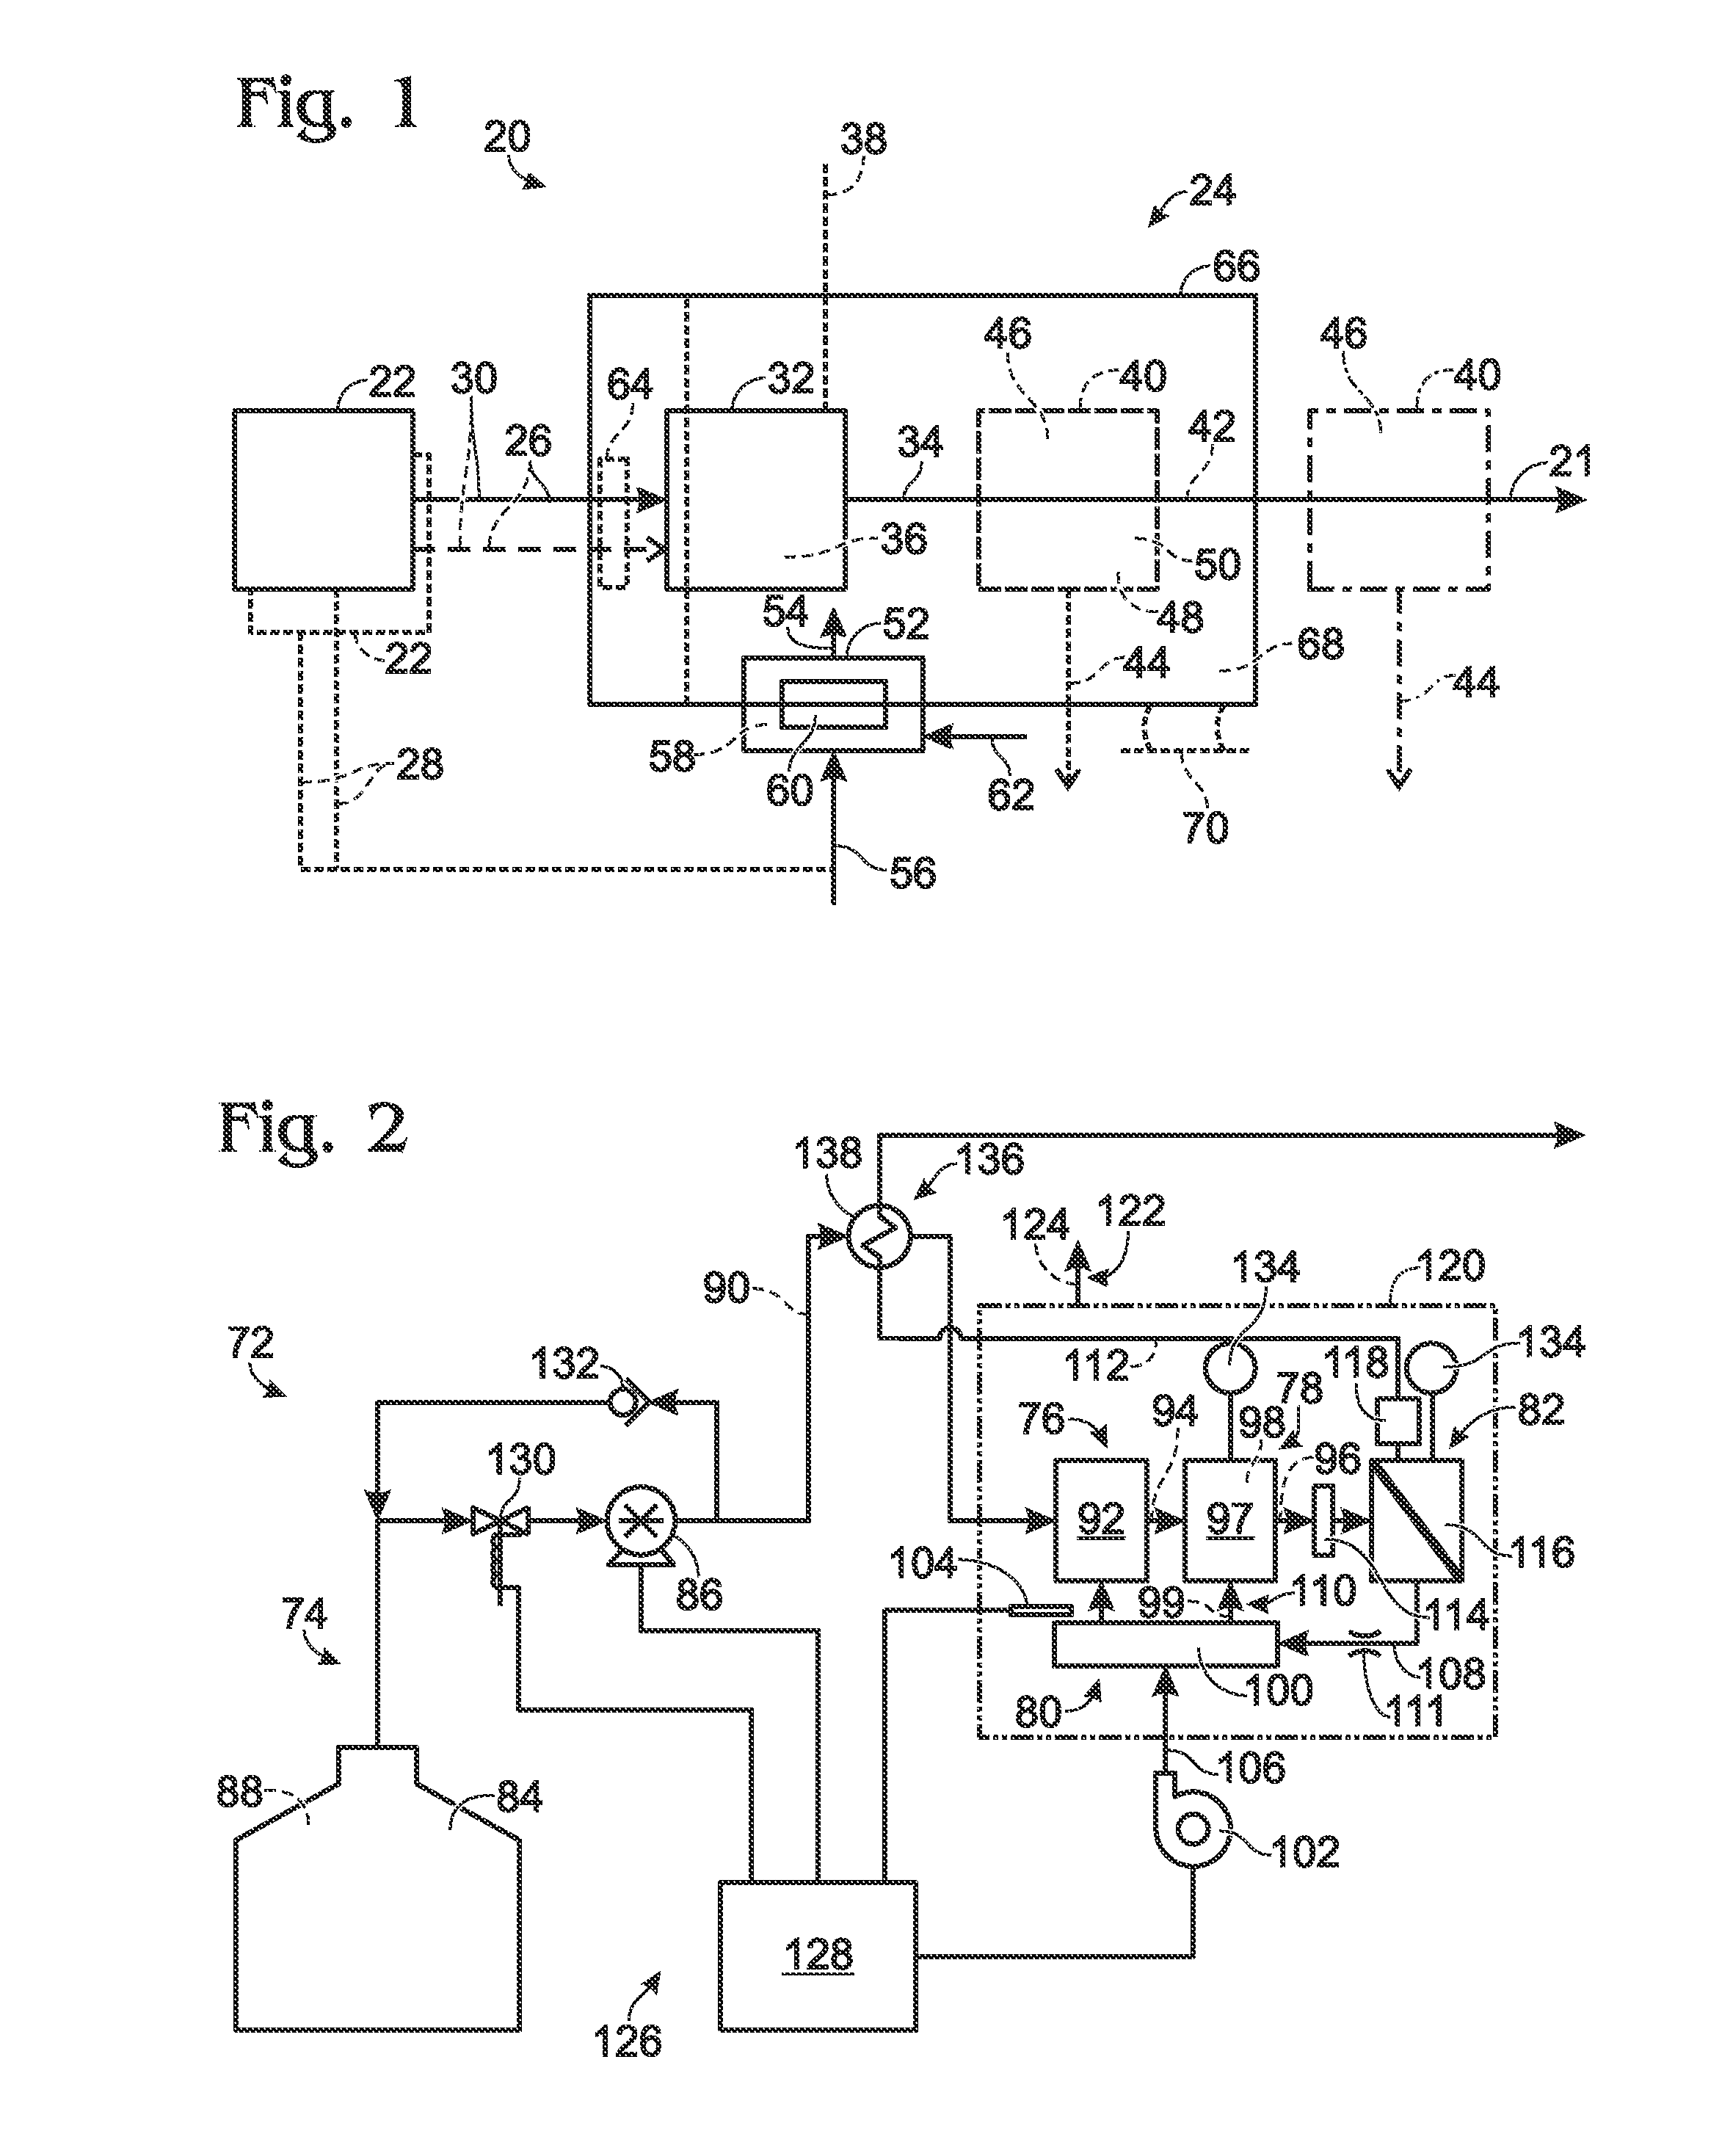 Hydrogen generation assemblies and hydrogen purification devices